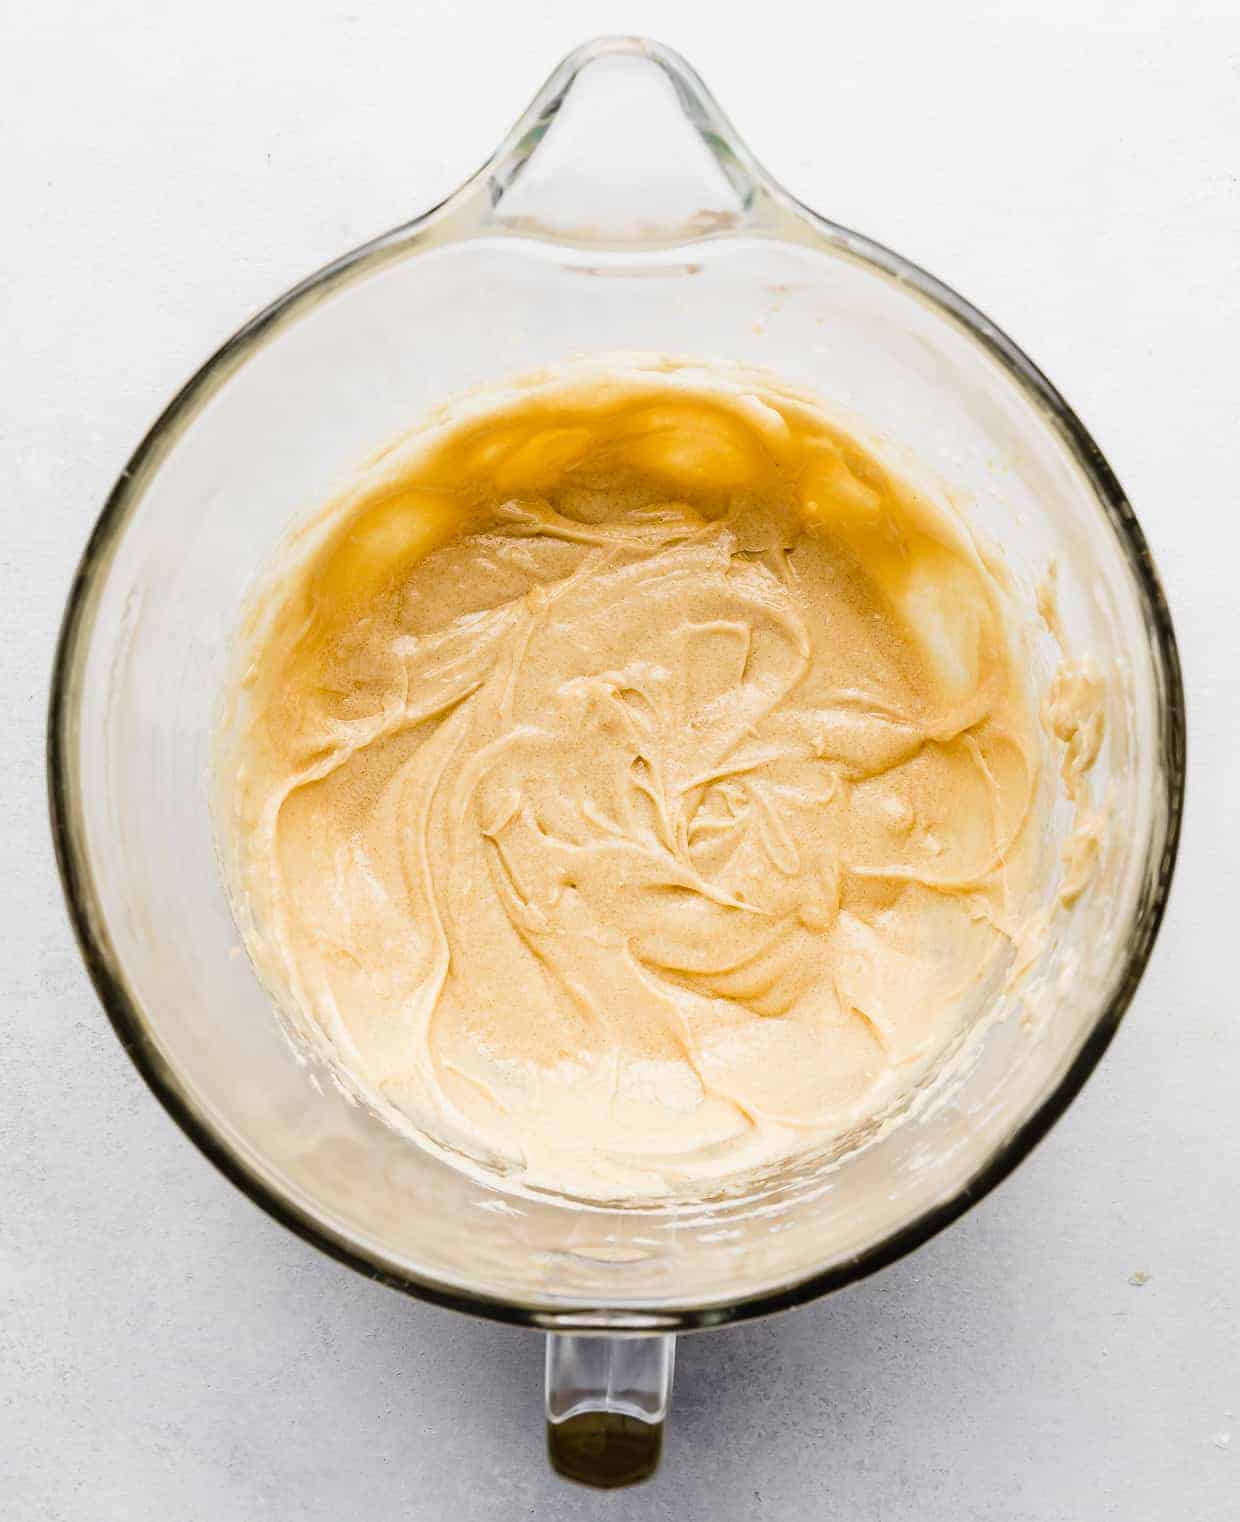 A light yellow soft creamed mixture in a glass bowl.